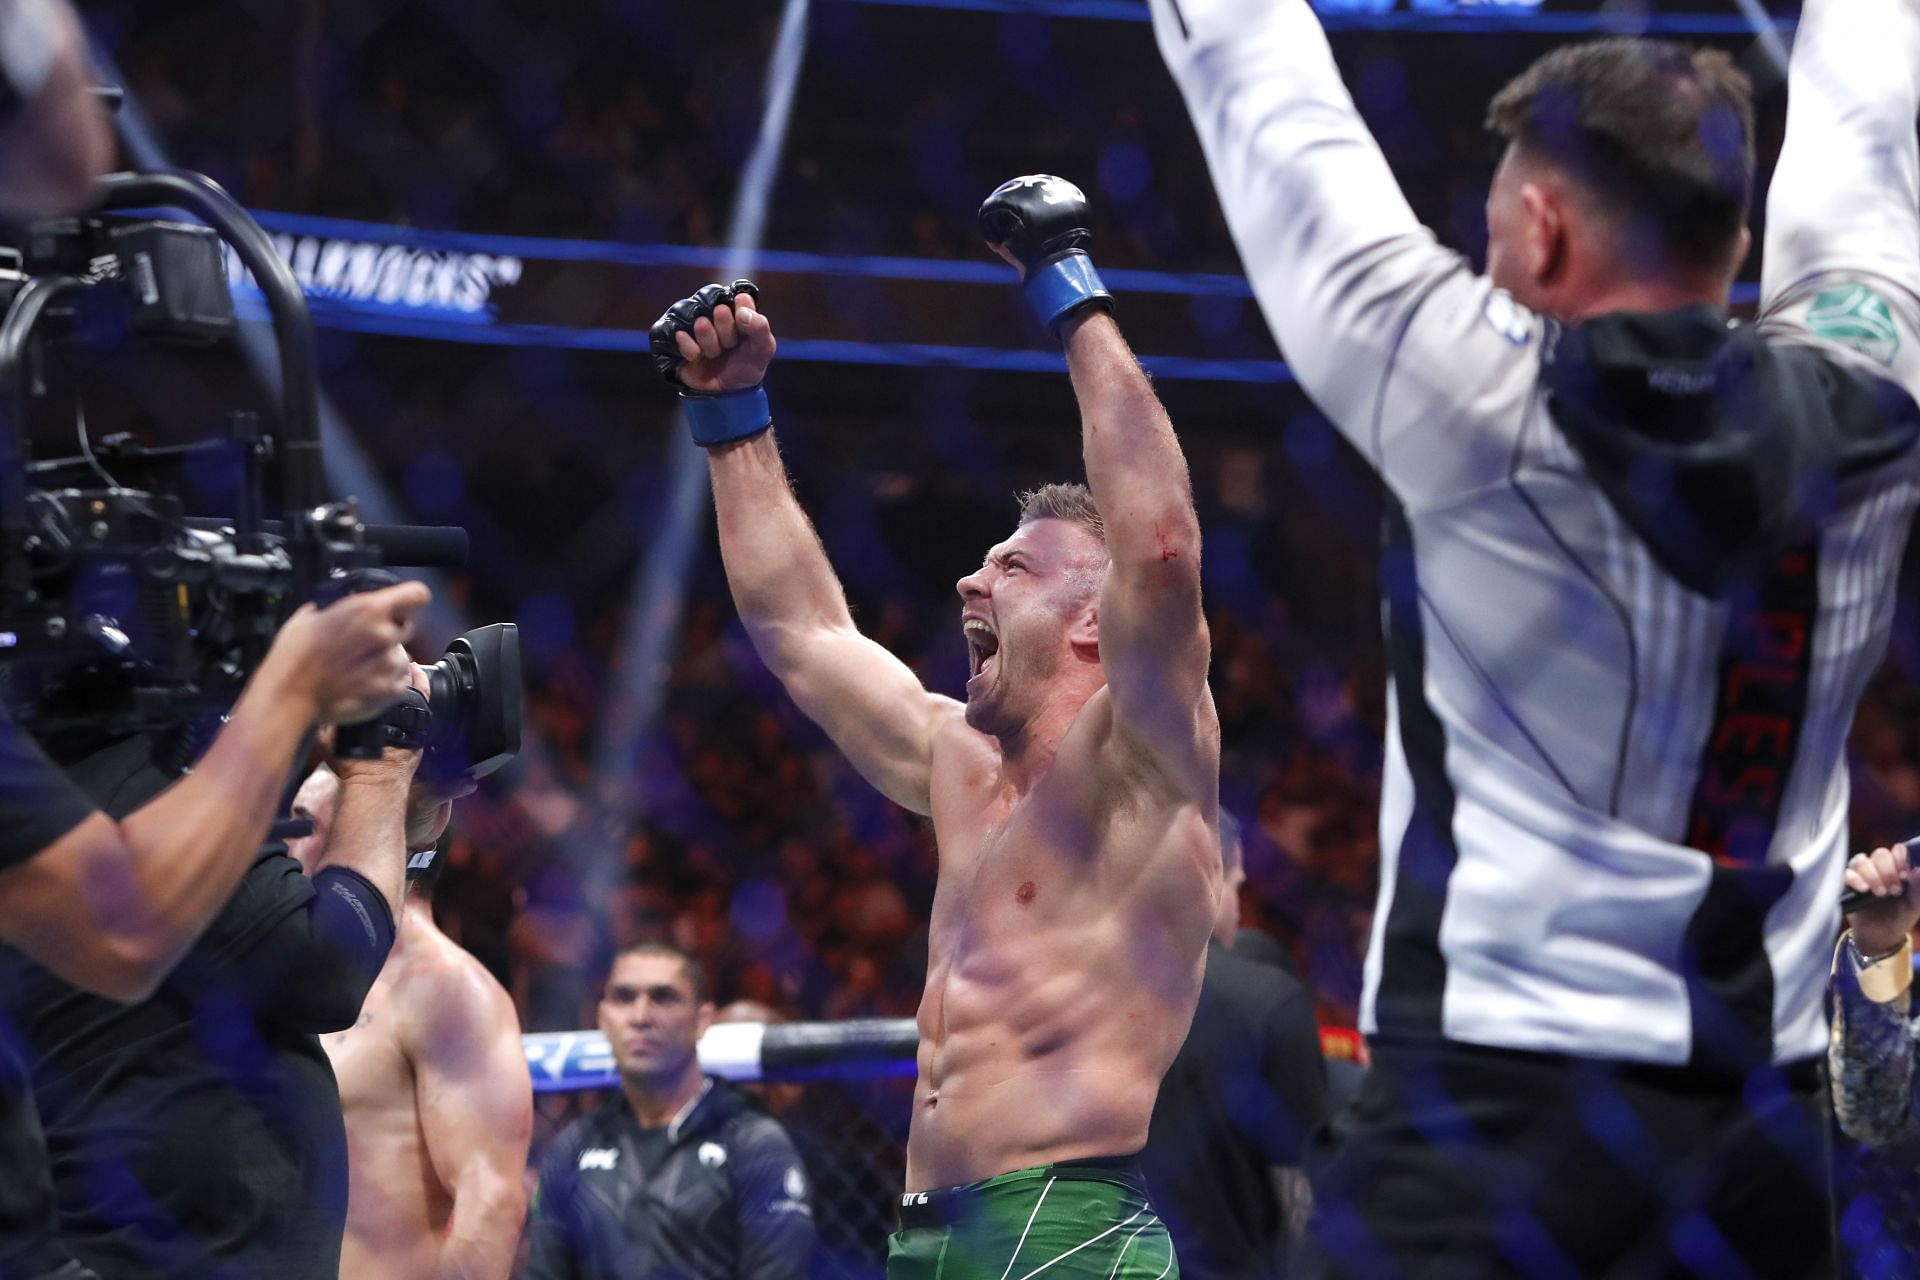 Dricus du Plessis picked up the biggest win of his career over Robert Whittaker